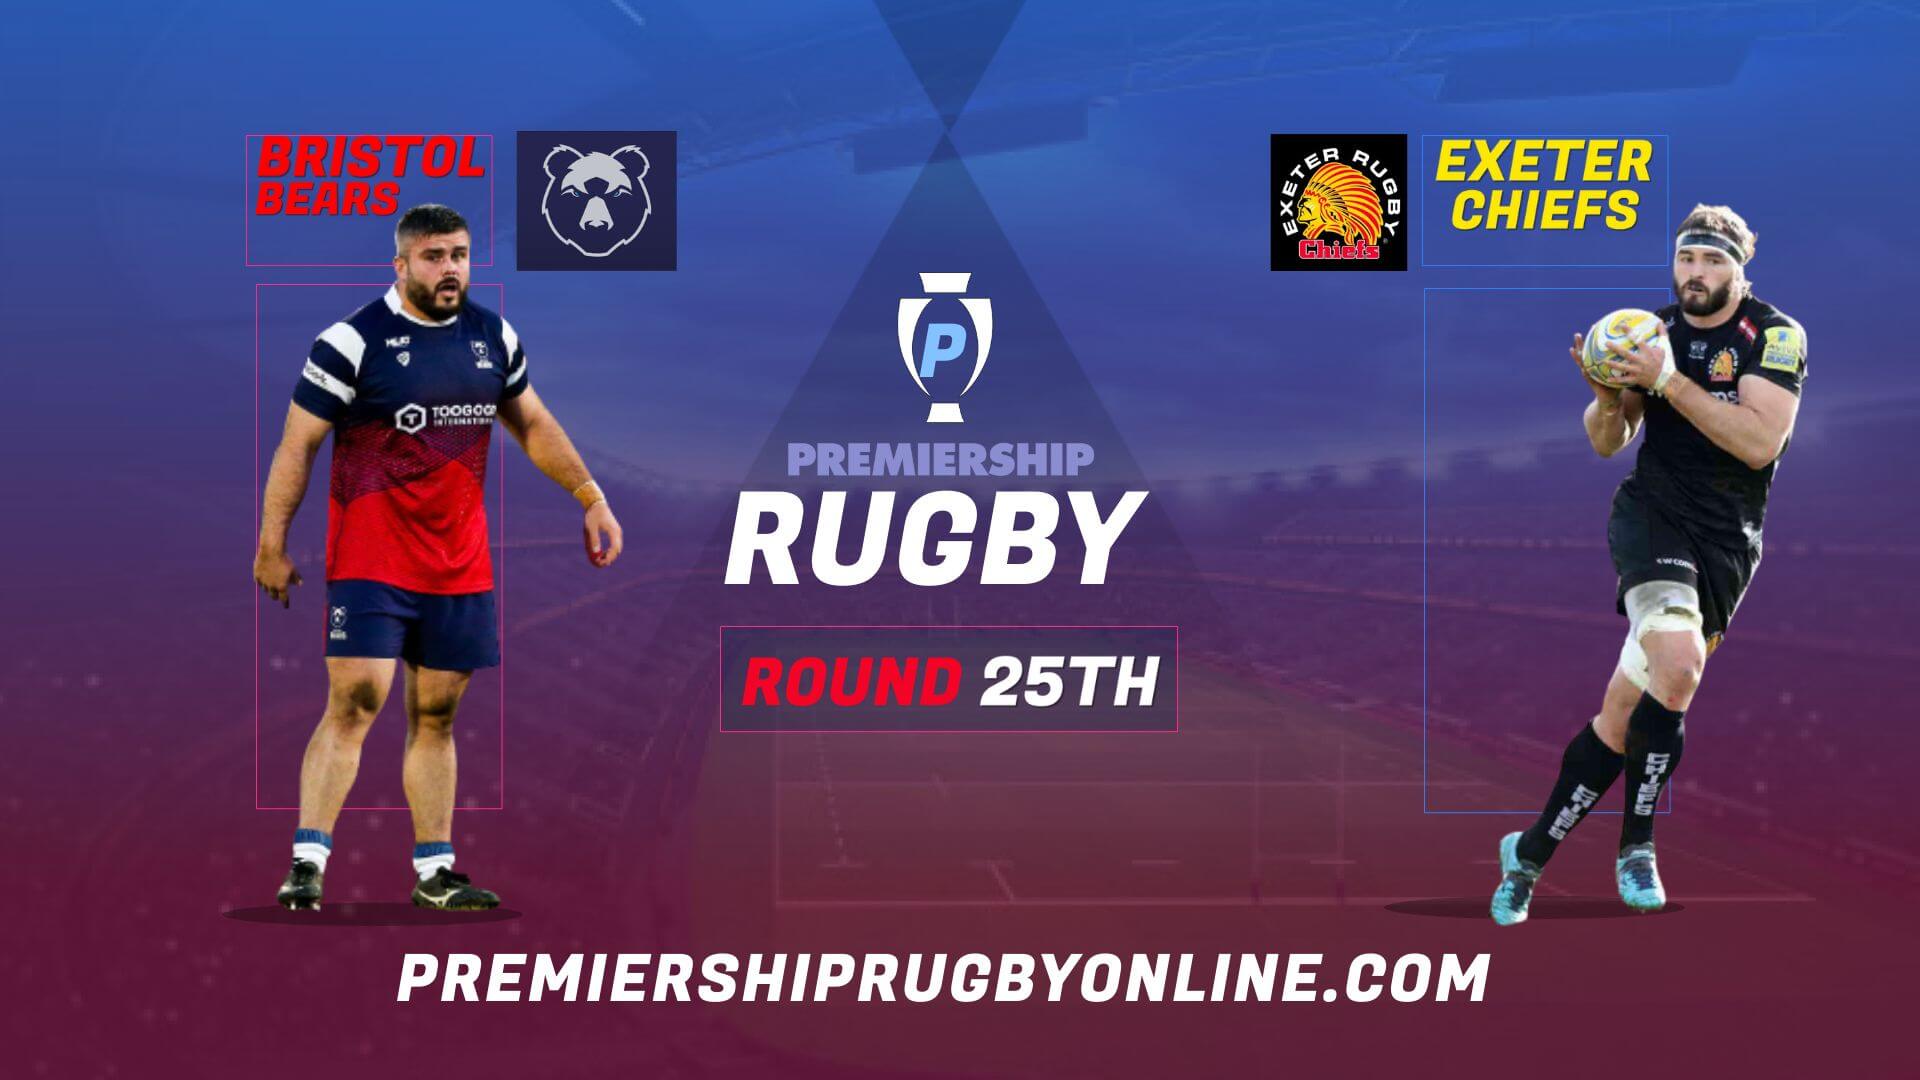 Bristol Bears Vs Exeter Chiefs Live Stream 2021-22 | Premiership Rugby Round 25